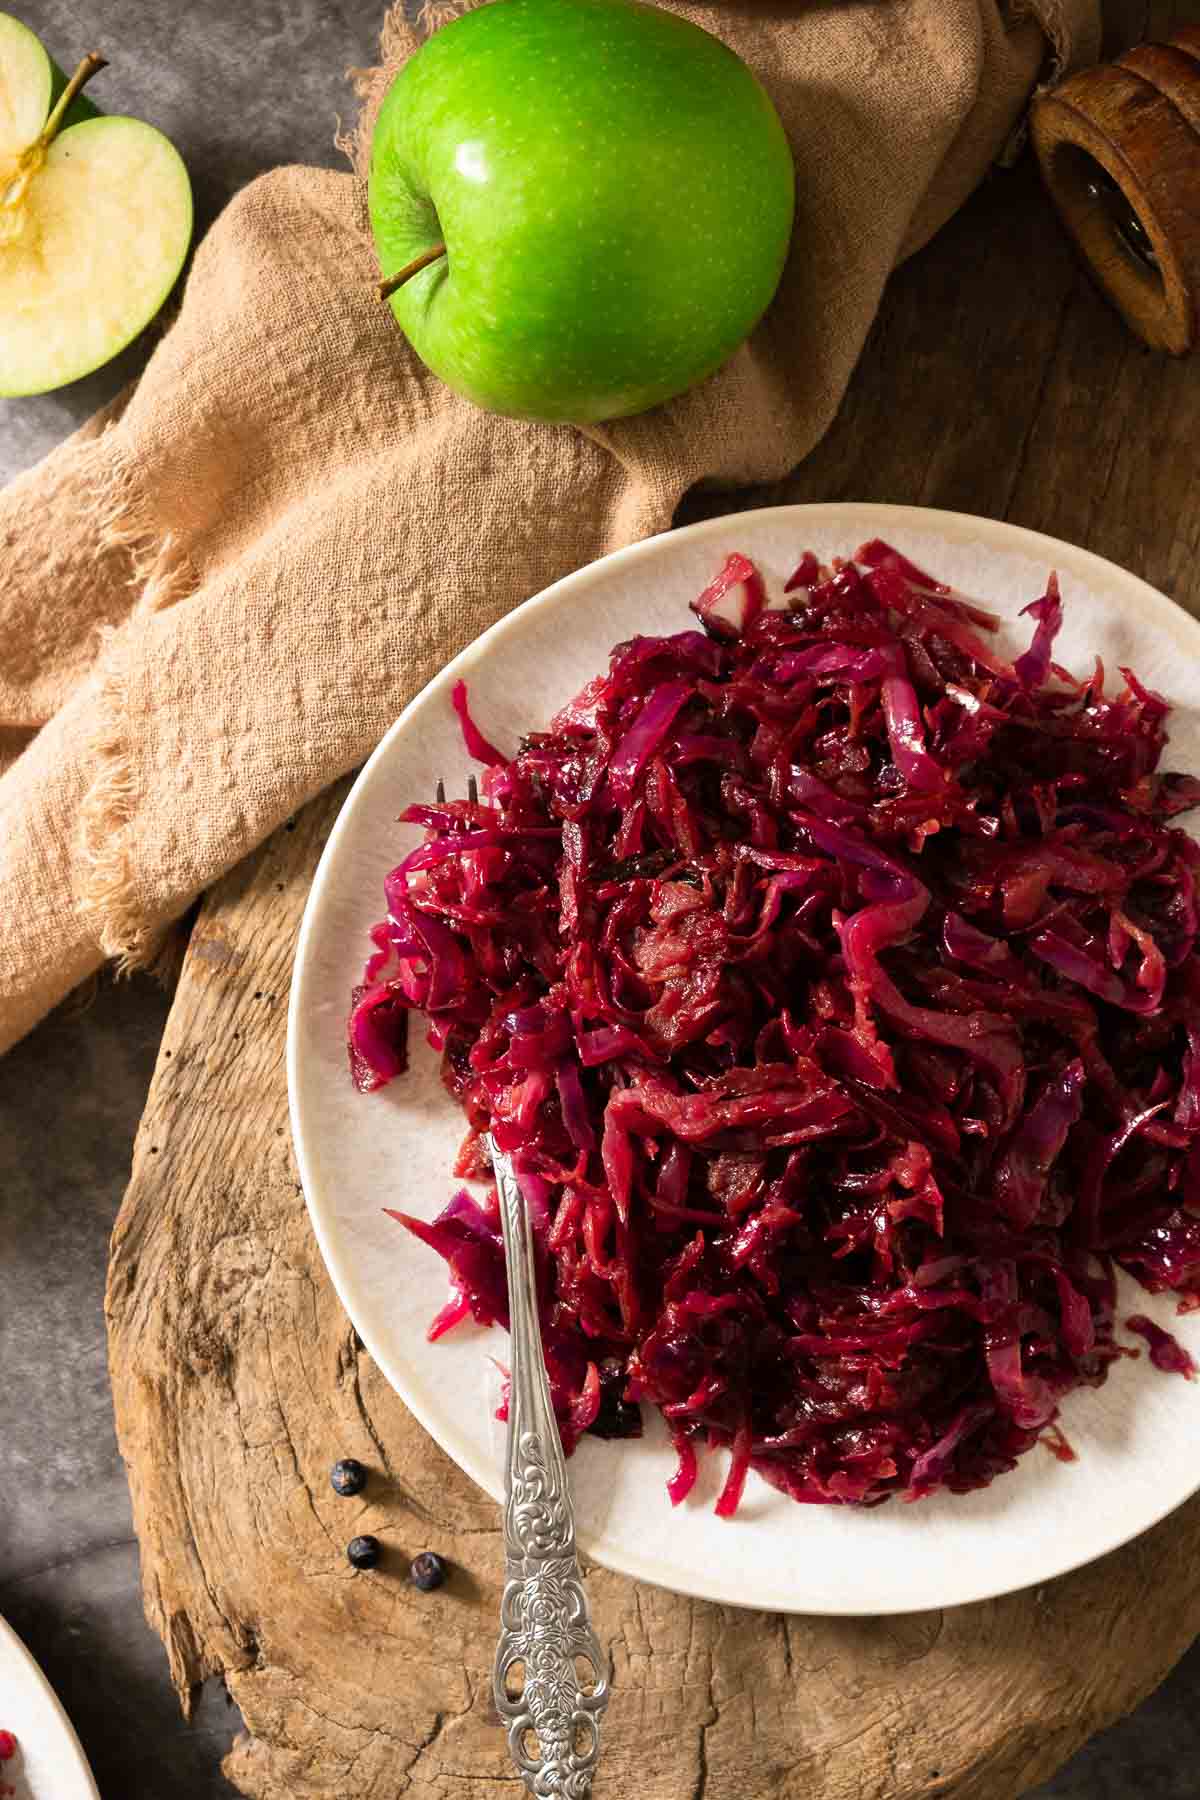 A large plate full of shredded and braised red cabbage or rotkohl.